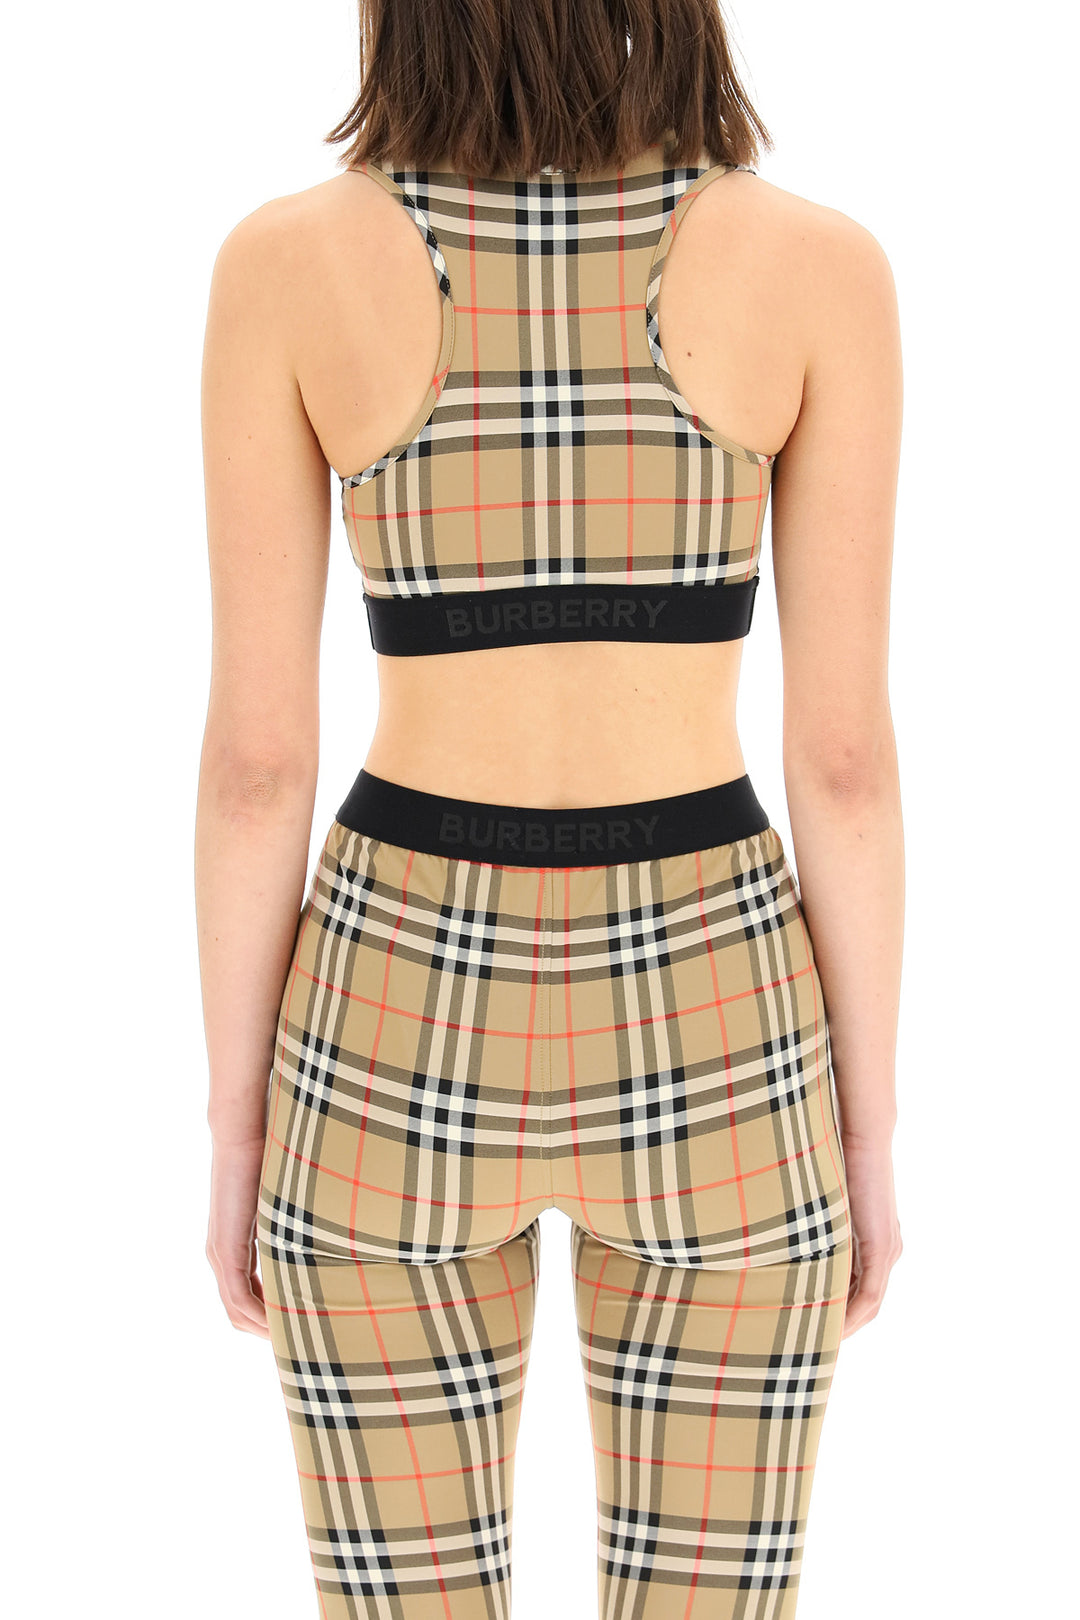 Burberry Dalby Check Sport Top   Beige